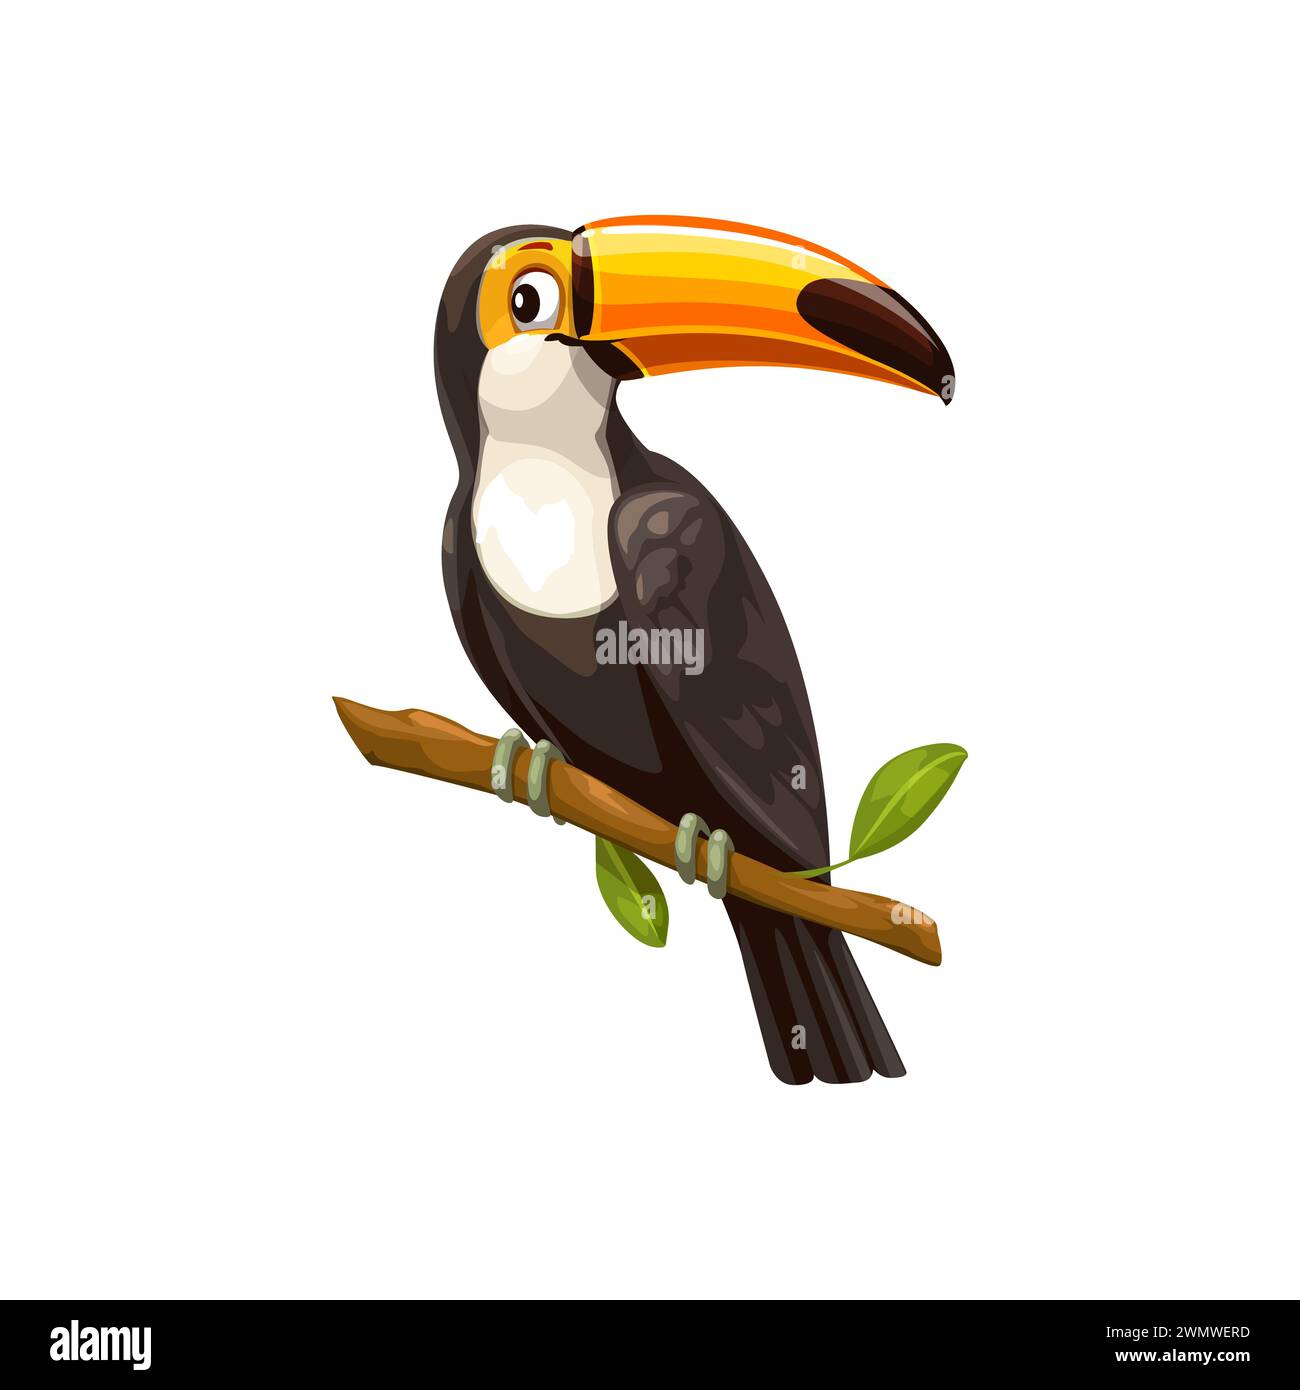 Toucan bird sitting on branch. Isolated vector tropical bird with vibrant plumage and distinctive, large, colorful bill. It inhabits central and south american forests, feeding on fruits and insects Stock Vector